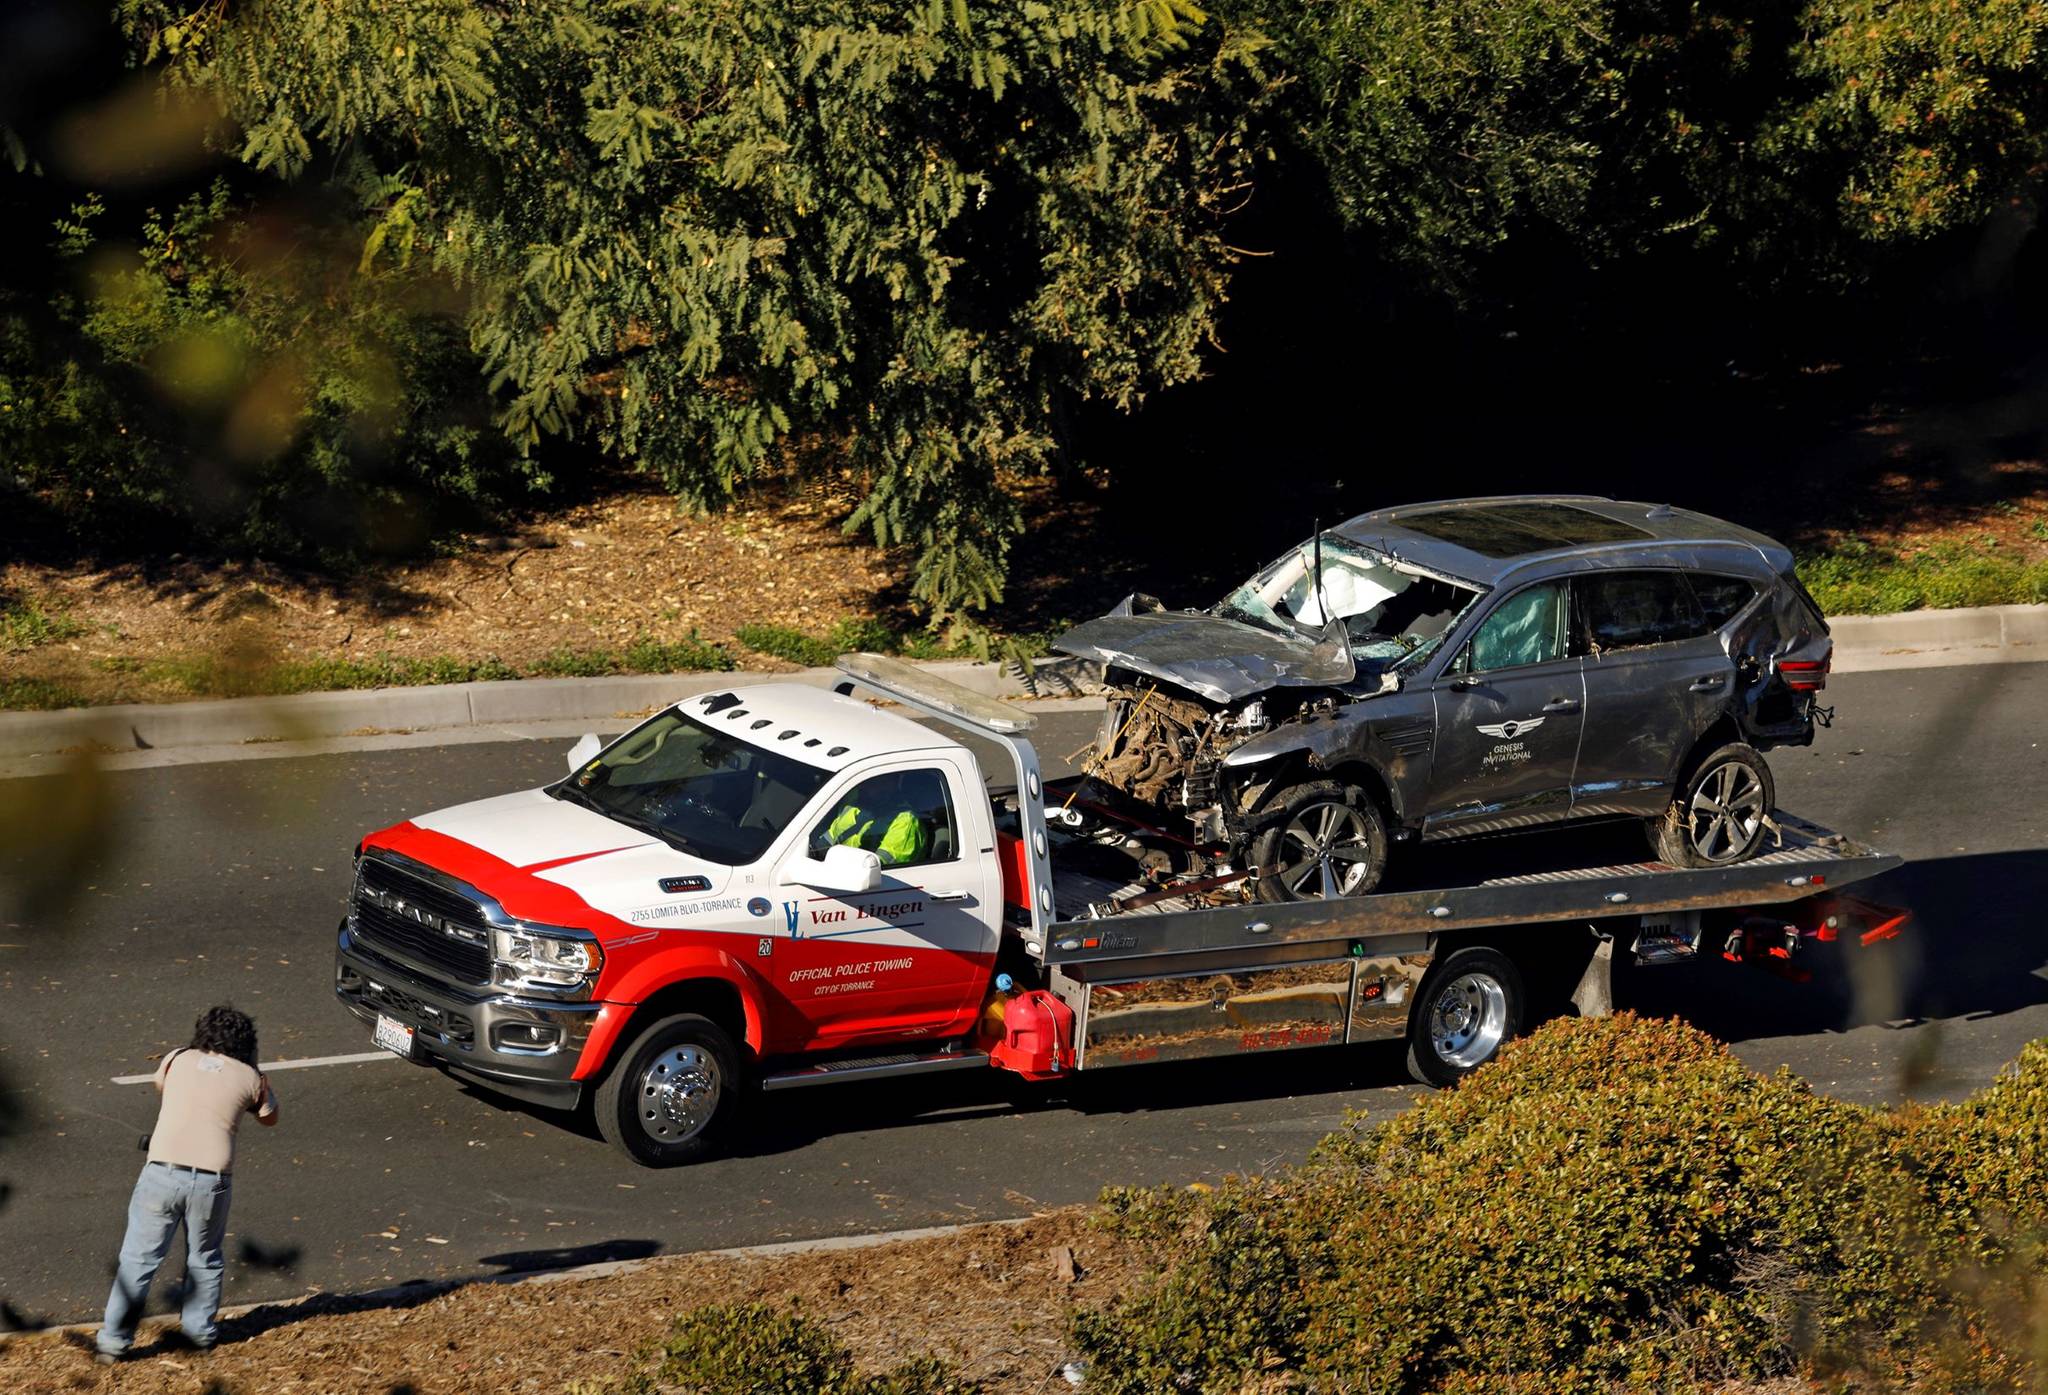 Carolyn Cole/Los Angeles Times 
The vehicle driven by Tiger Woods is towed away on Hawthorne Boulevard after he ran off the road and sustained injuries on Feb. 23.